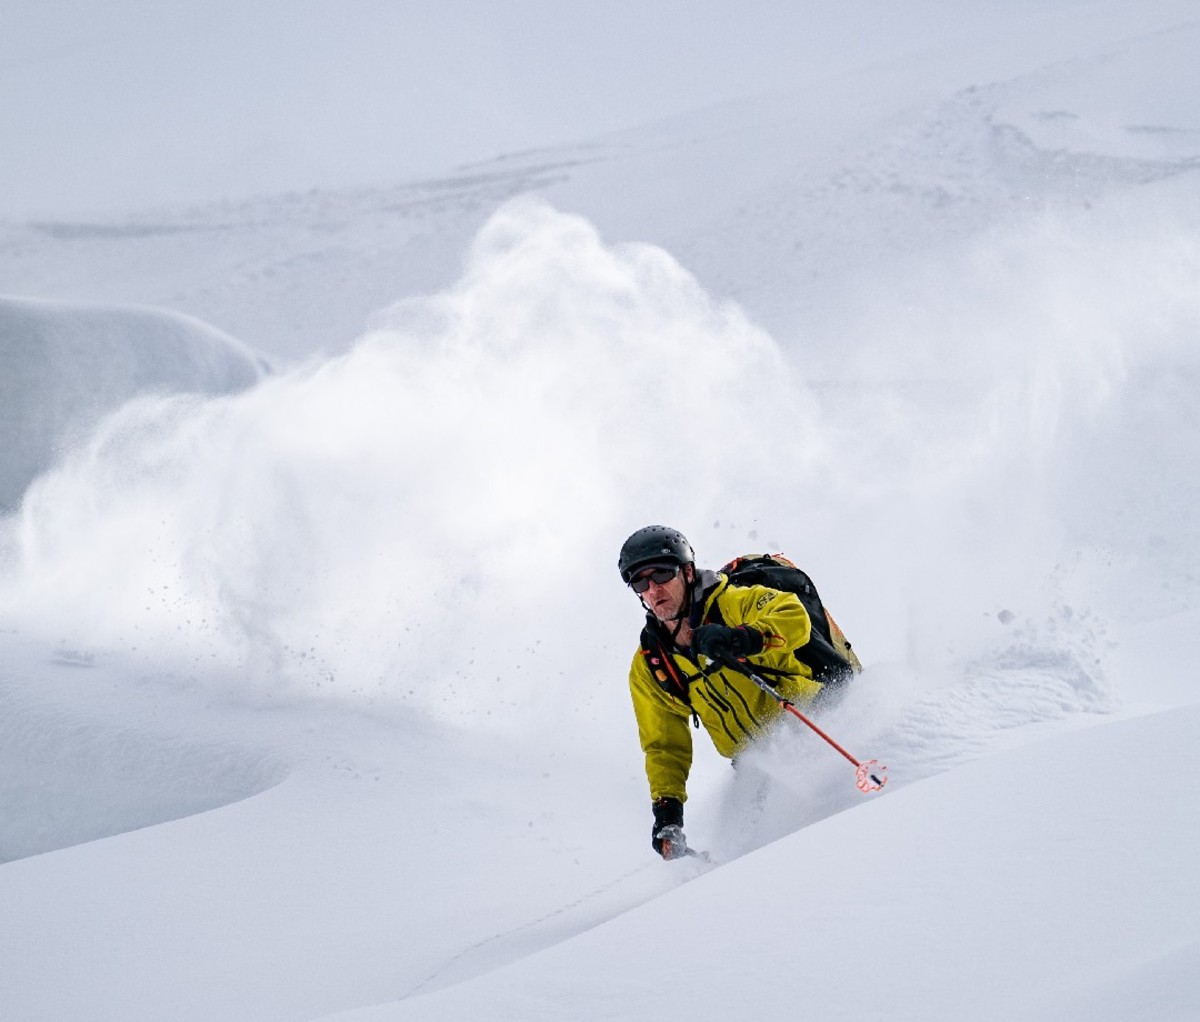 Skier on a powdery slope in the BC backcountry